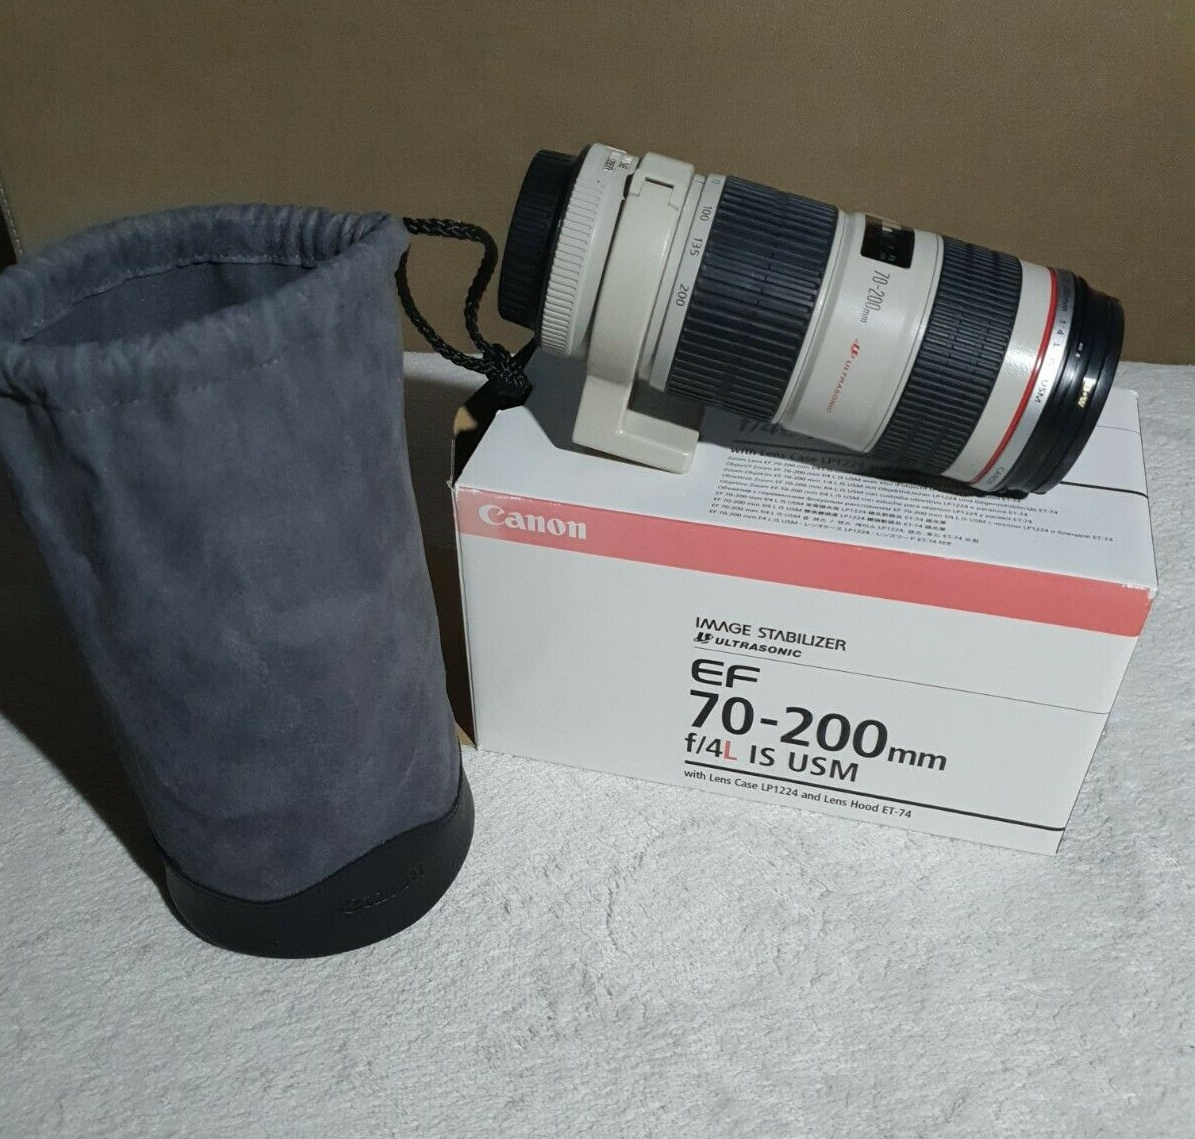 Canon EF 70-200/4 L IS USM